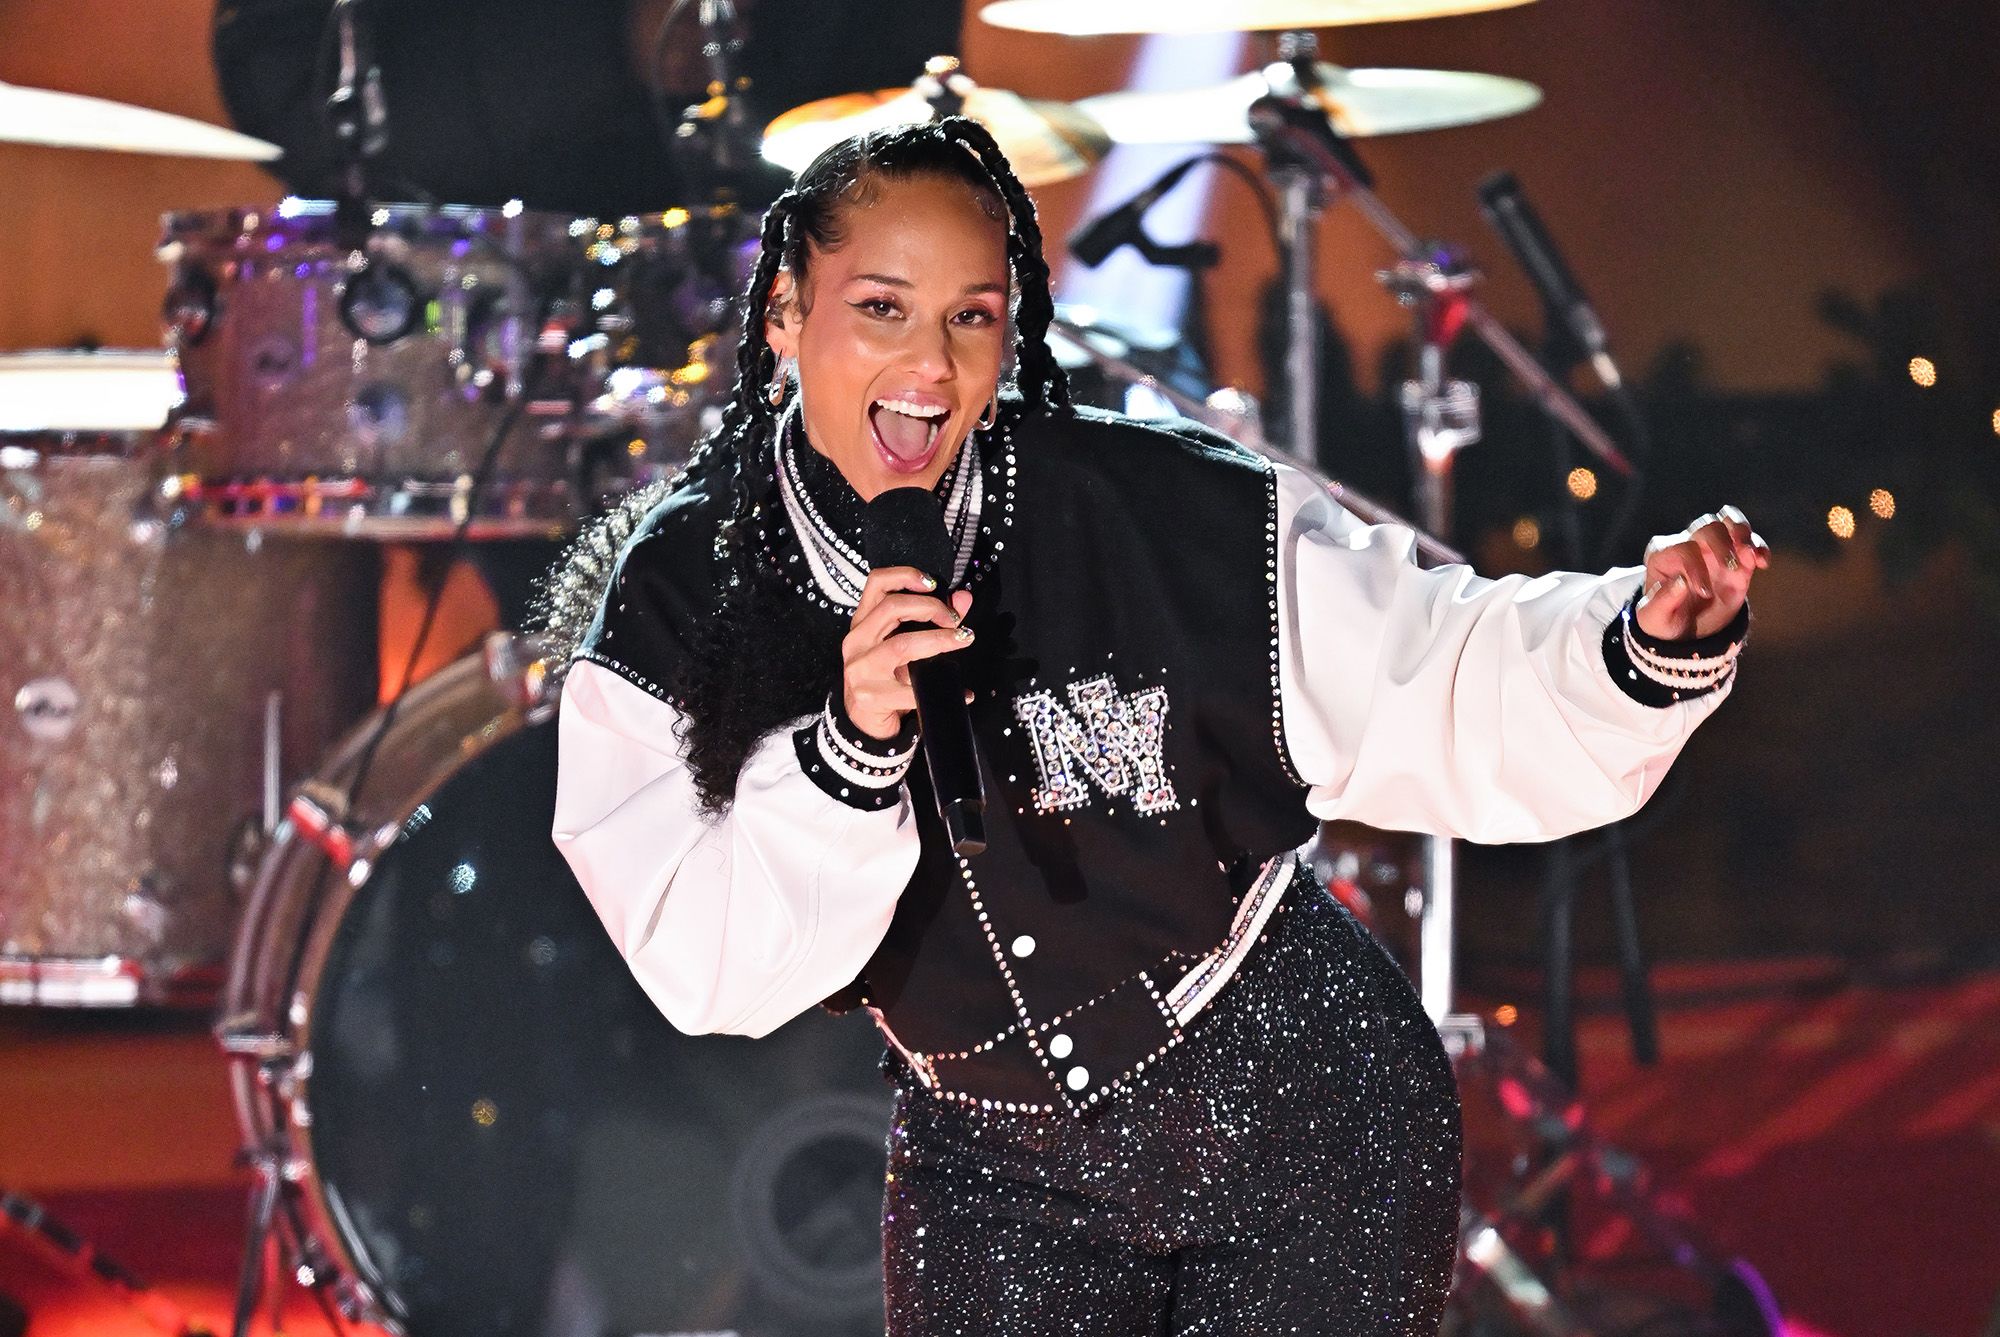 Alicia Keys debuts her first ever holiday album